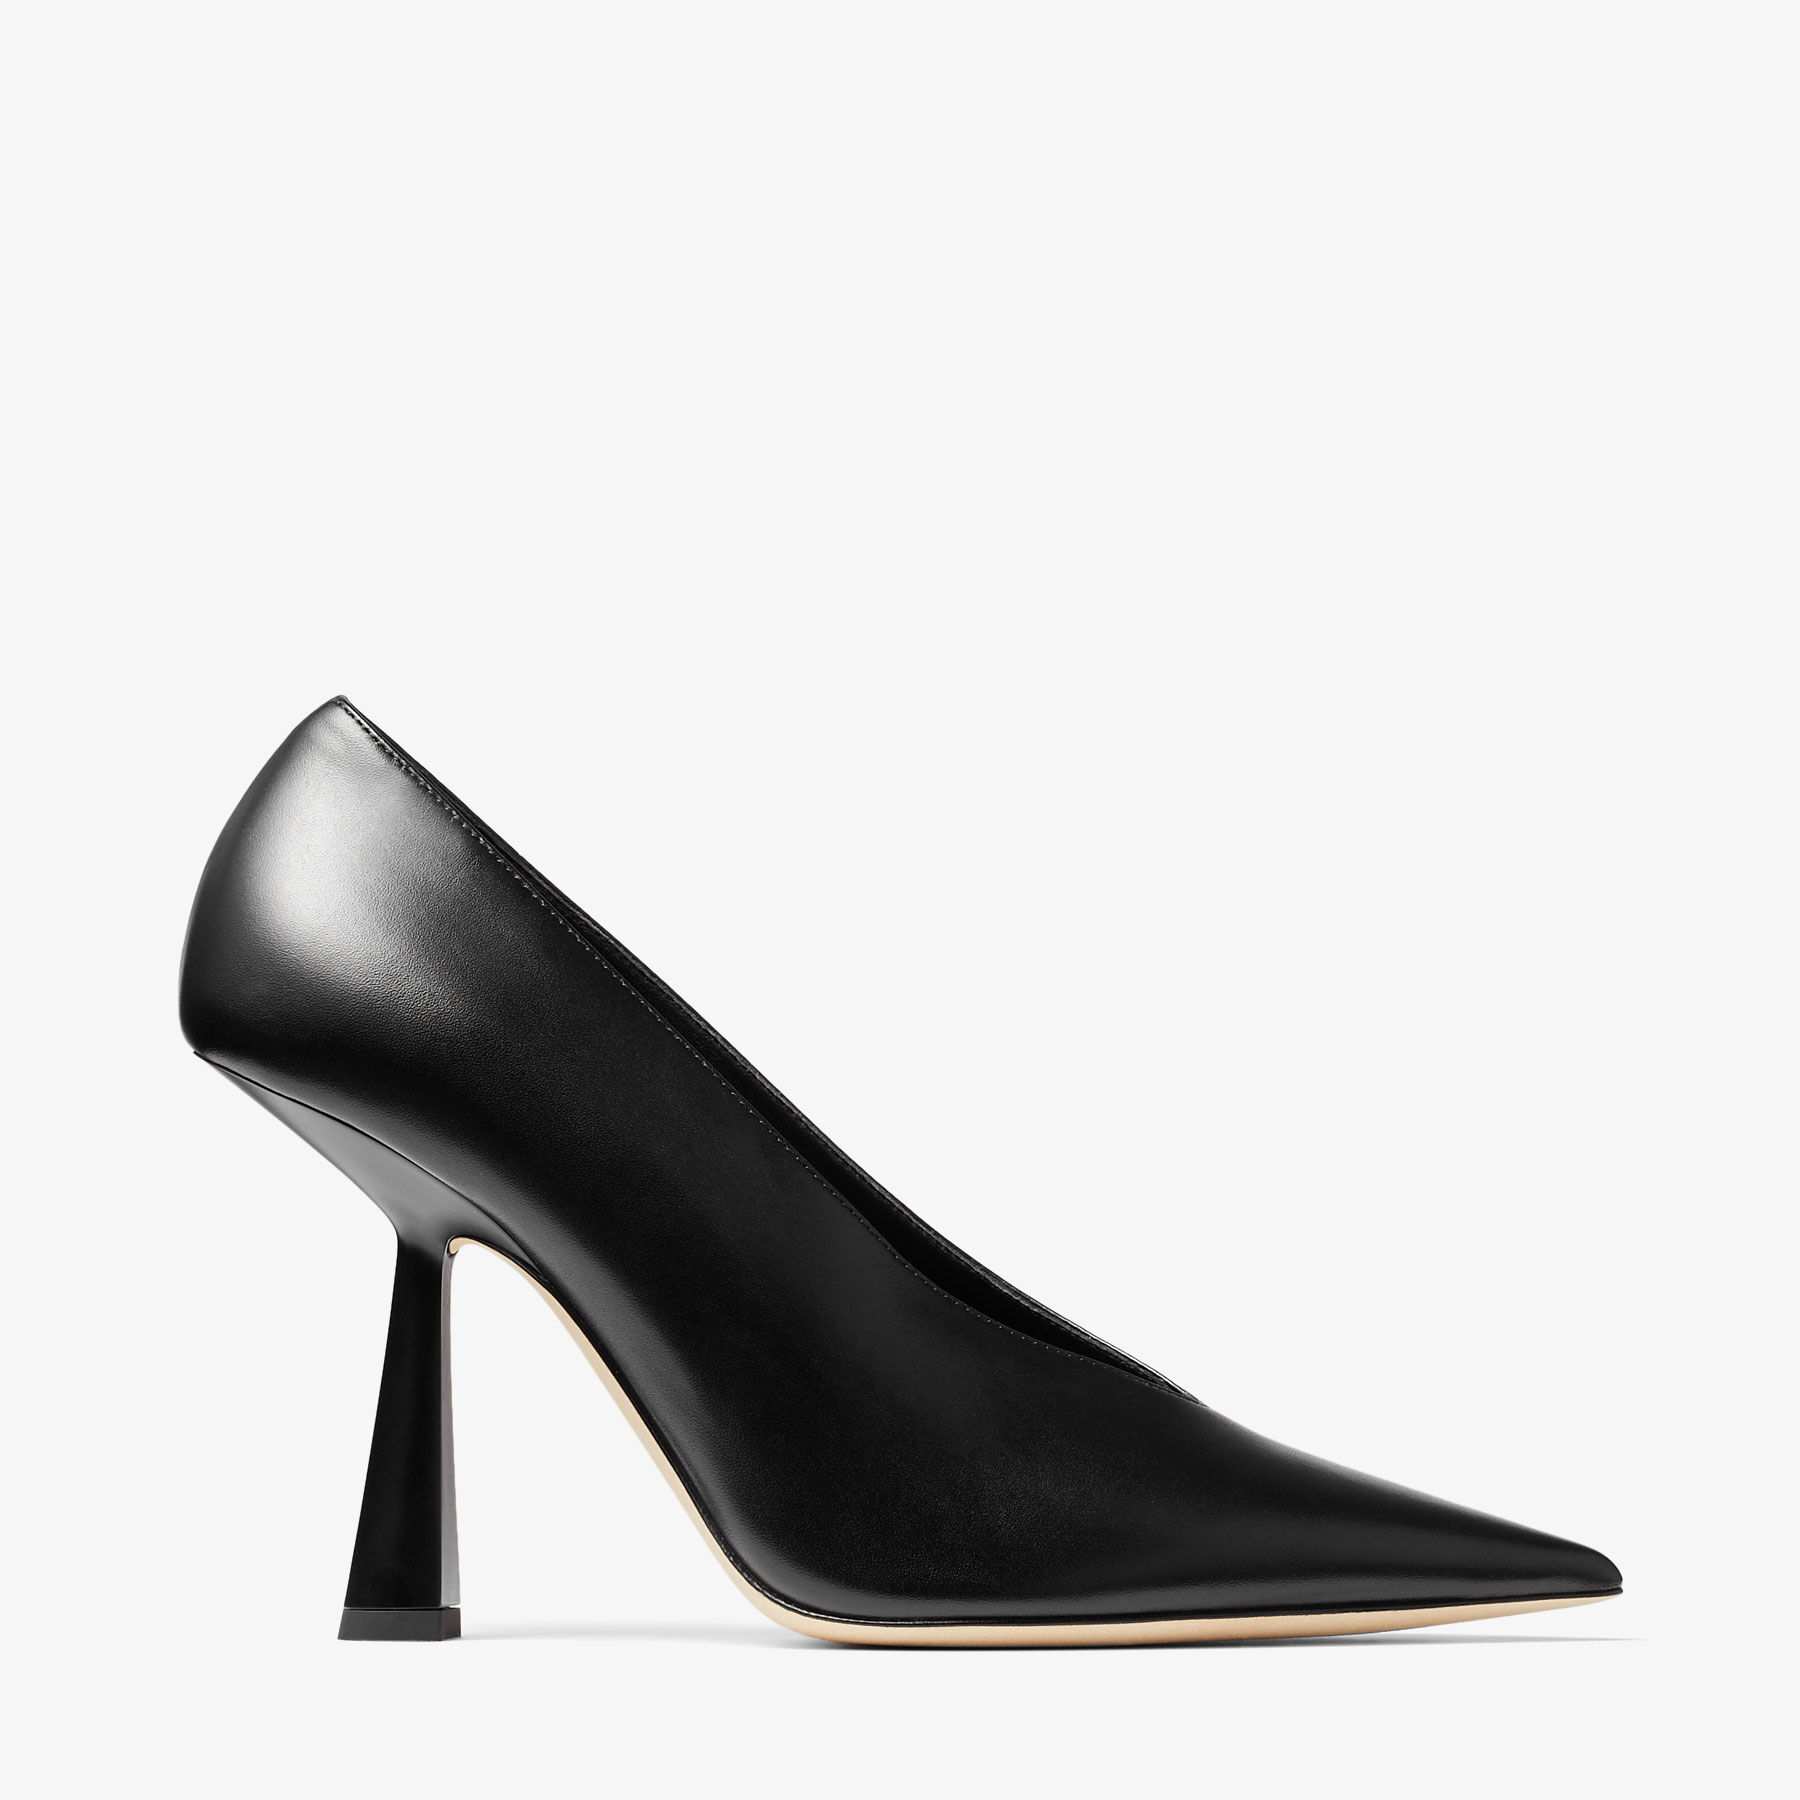 MARYANNE 100, Black Calf Leather Pointed-Toe Pumps, Autumn Collection